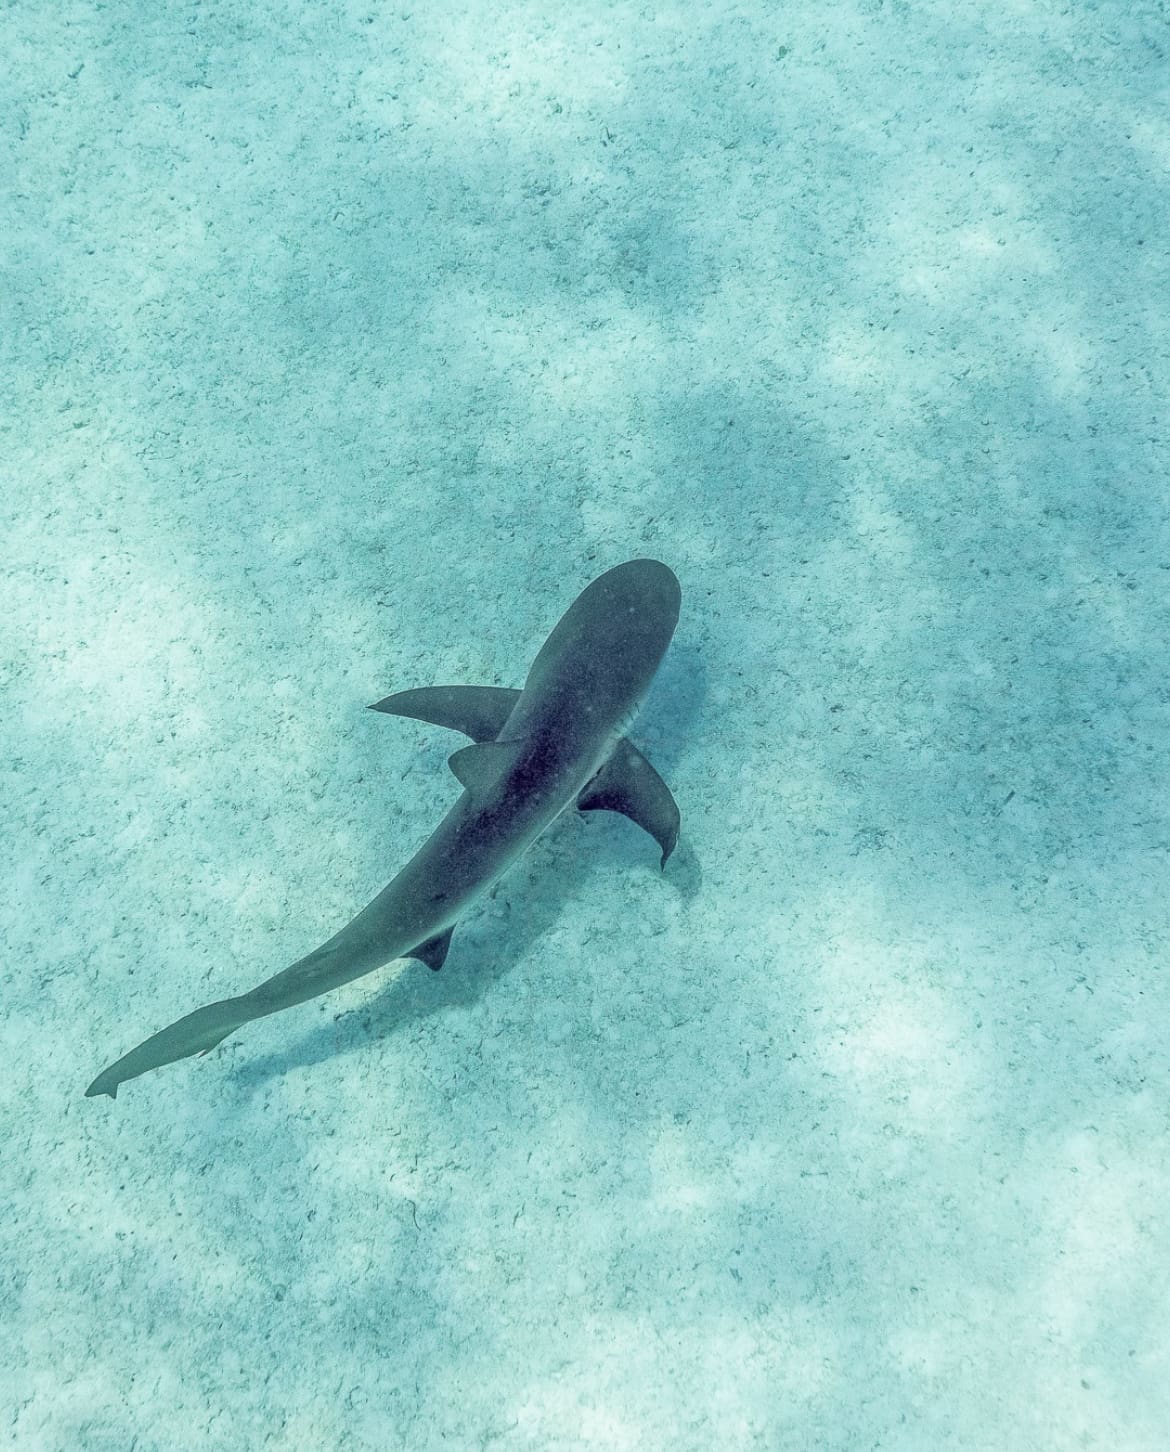 A Nurse shark cruising the clear waters off Freeport